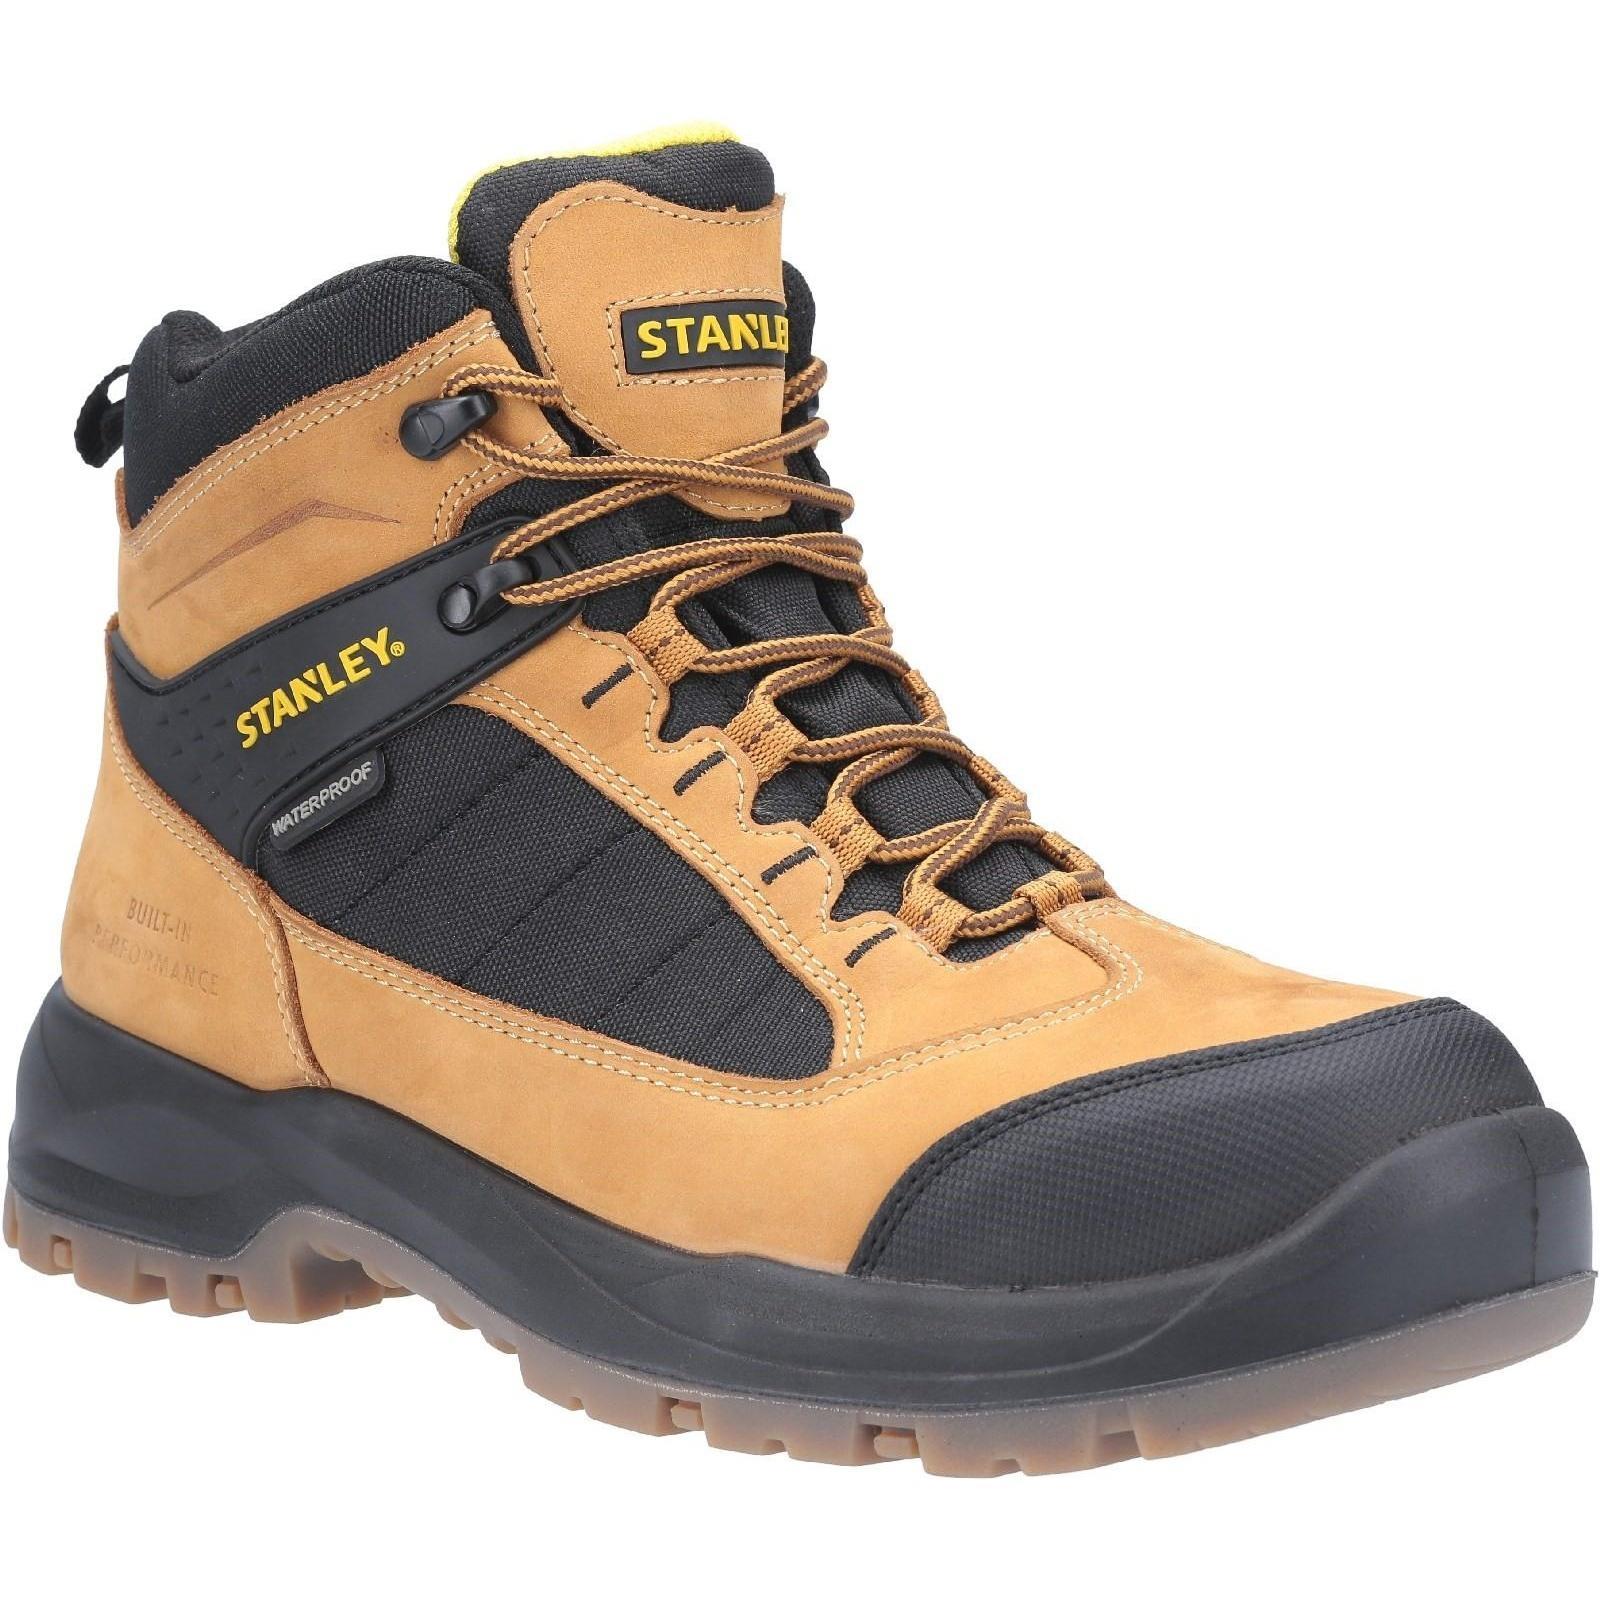 Stanley Mens Berkeley Full Lace Up Leather Safety Boot (Honey) (8 UK)